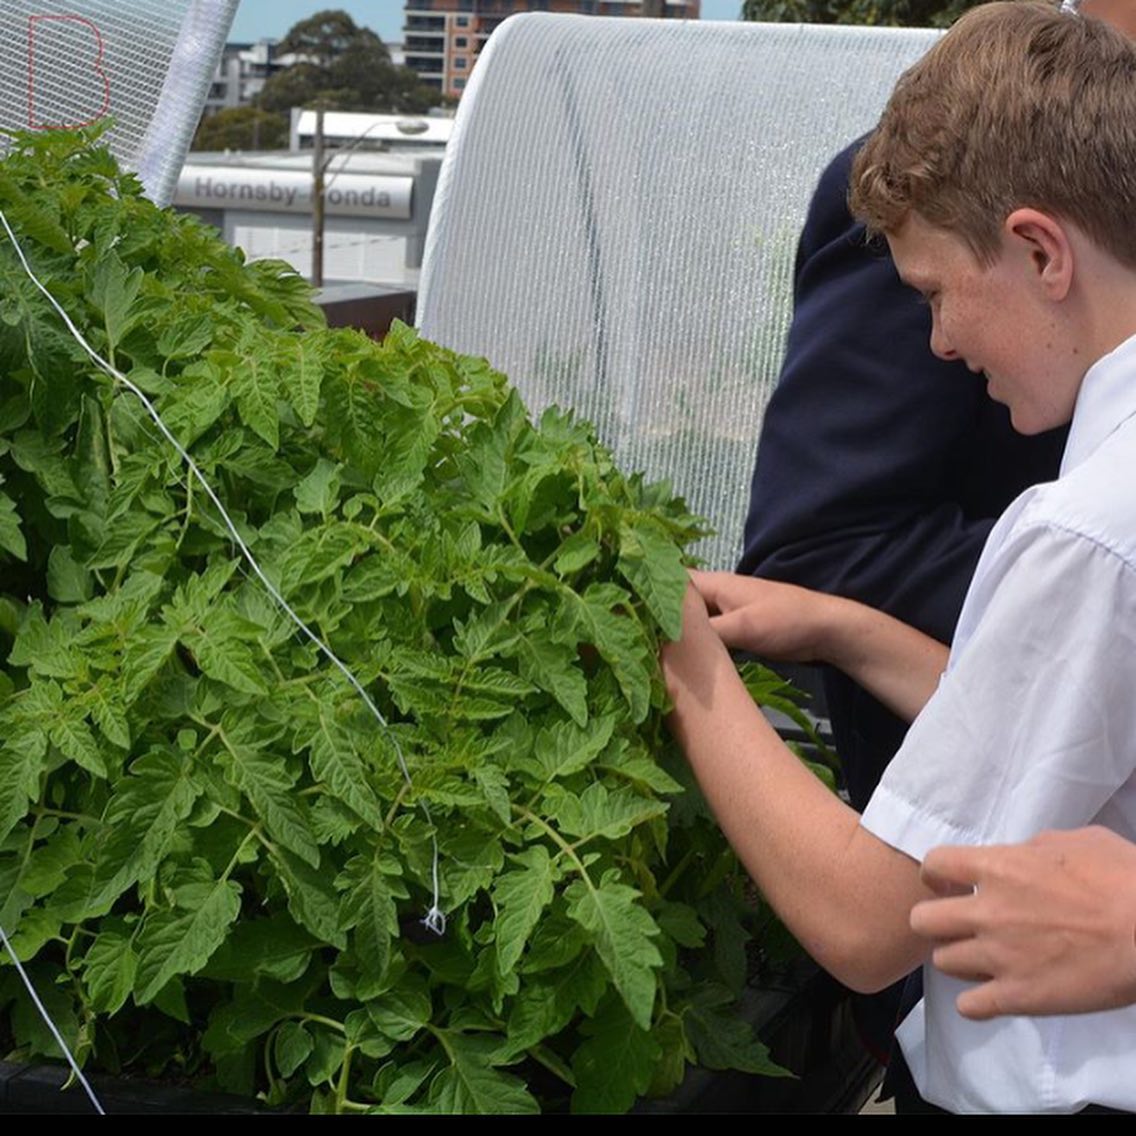 VEGEPODS UPDATE | After five weeks, our vegepods are growing quicker than expected thanks to a bit of rain and sunshine over the break. Our Year 9 students enjoyed trying some of their first grown lettuce! #WeAreBarker

Repost @BarkerCollege, Hornsby, Sydney #gardeningkids